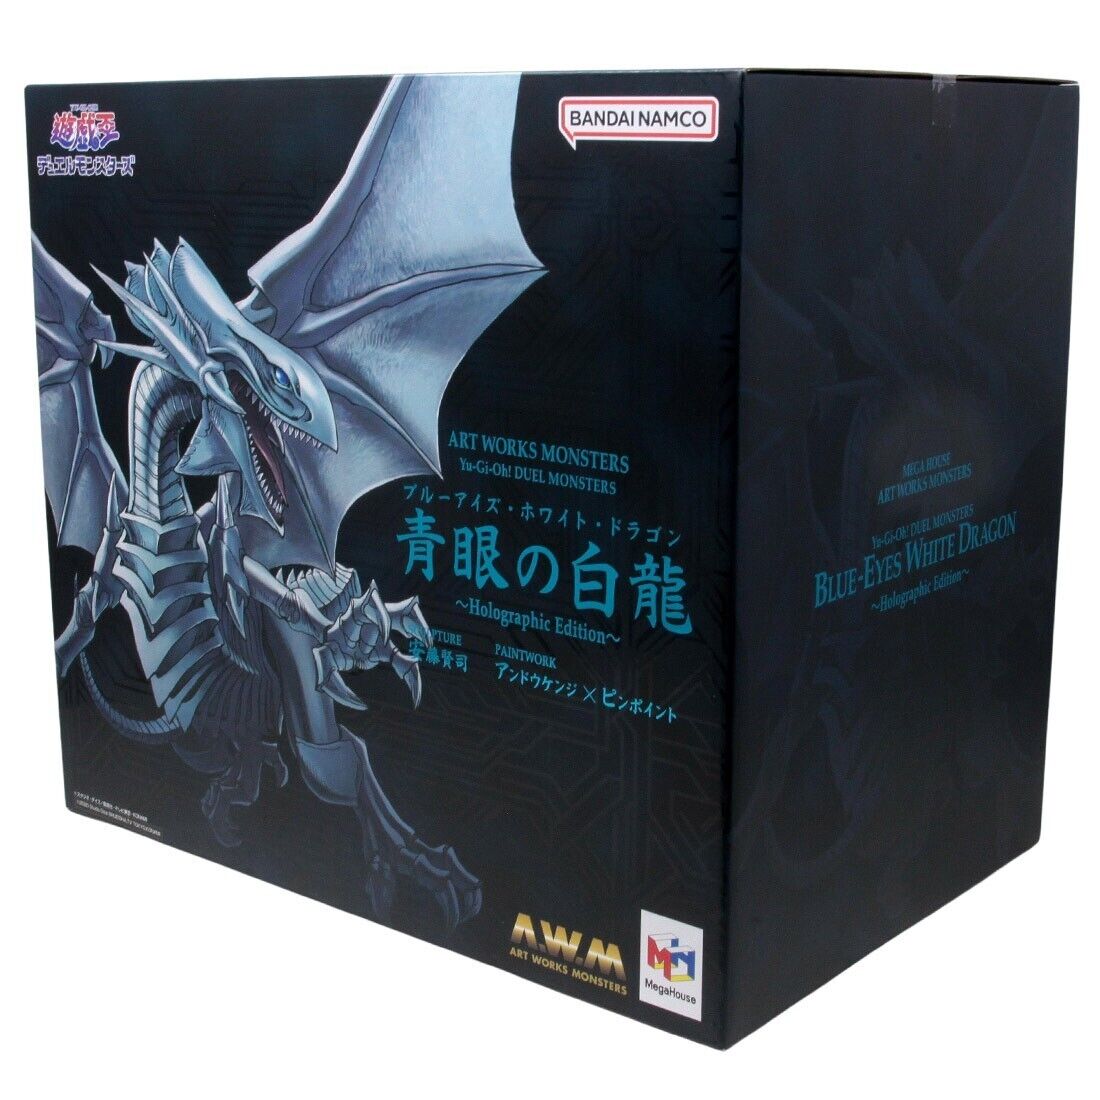 Yu-Gi-Oh Duel Monsters Blue-Eyes White Dragon Holographic Edt Art Works Monster